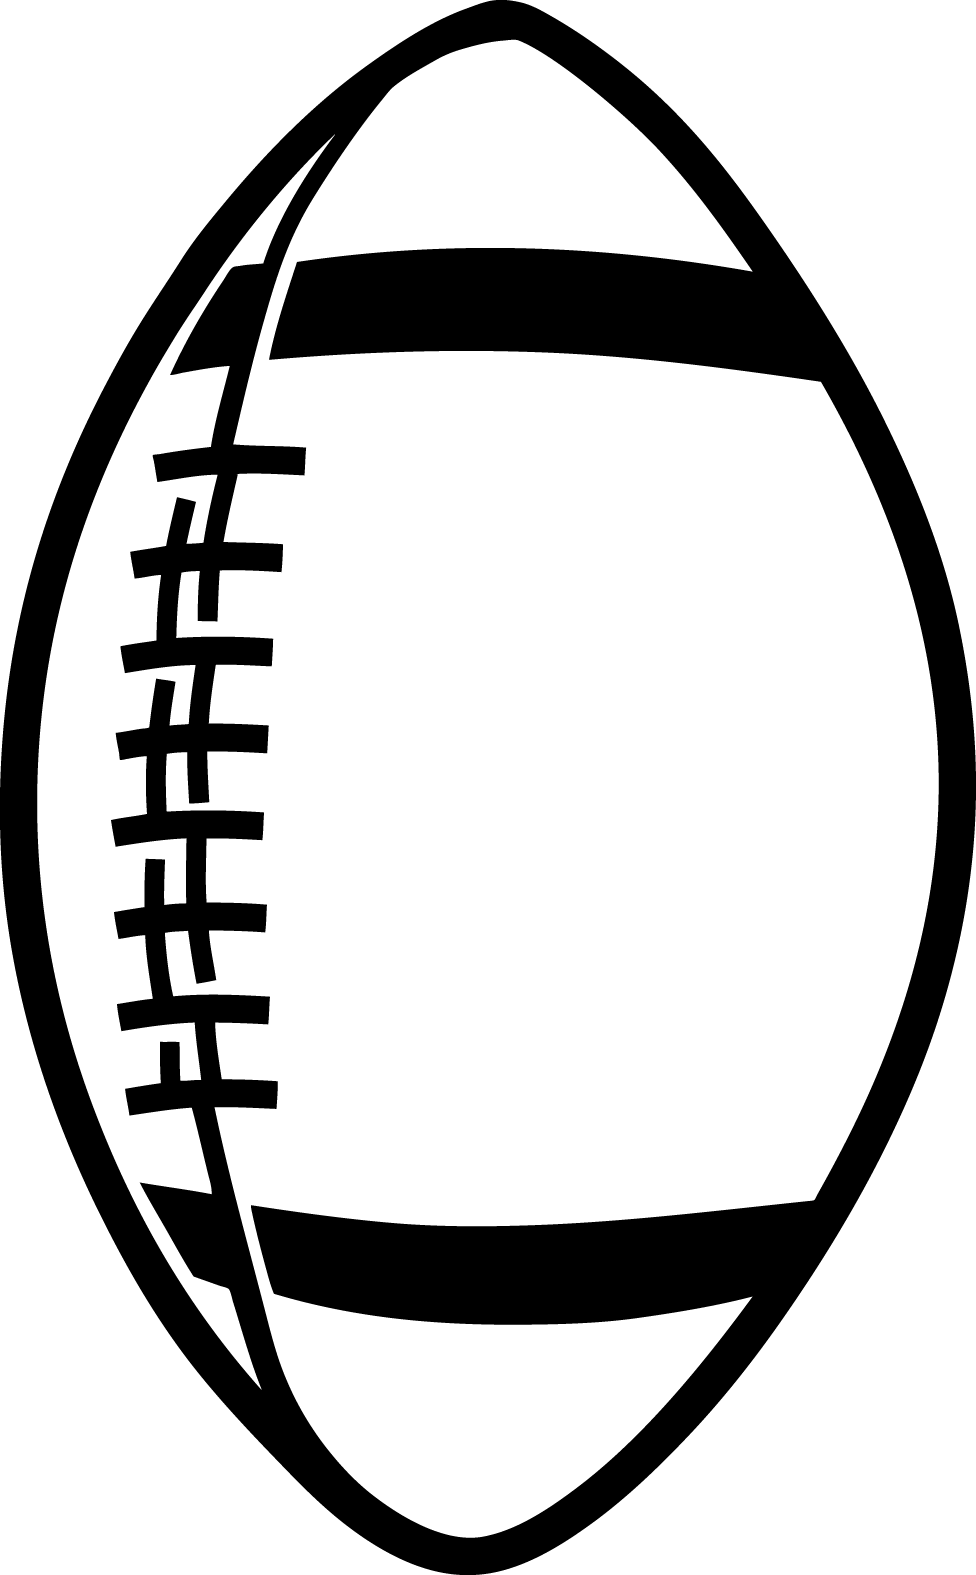 Football outline image free clipart images